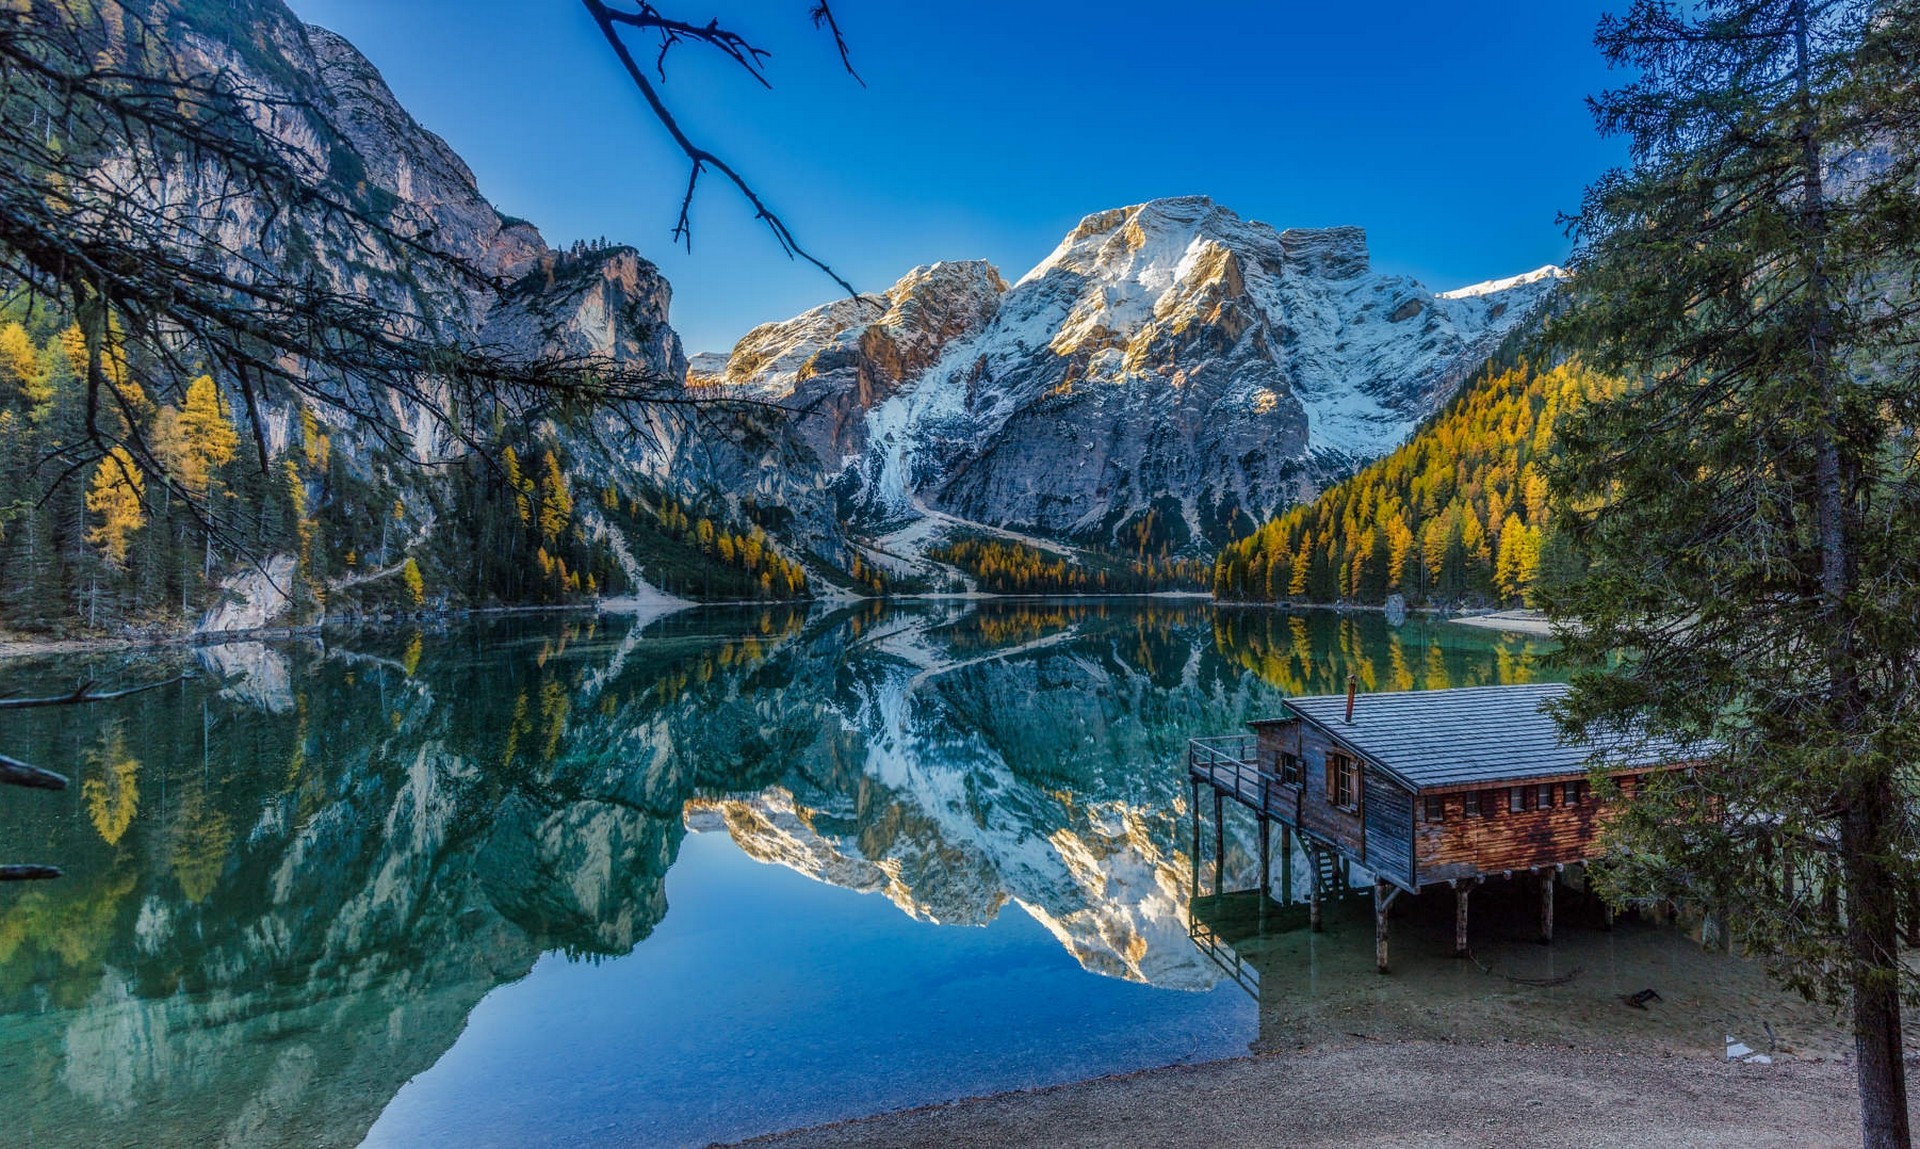 General 1920x1149 nature landscape lake fall mountains forest blue sky water house Alps Italy Pragser Wildsee reflection